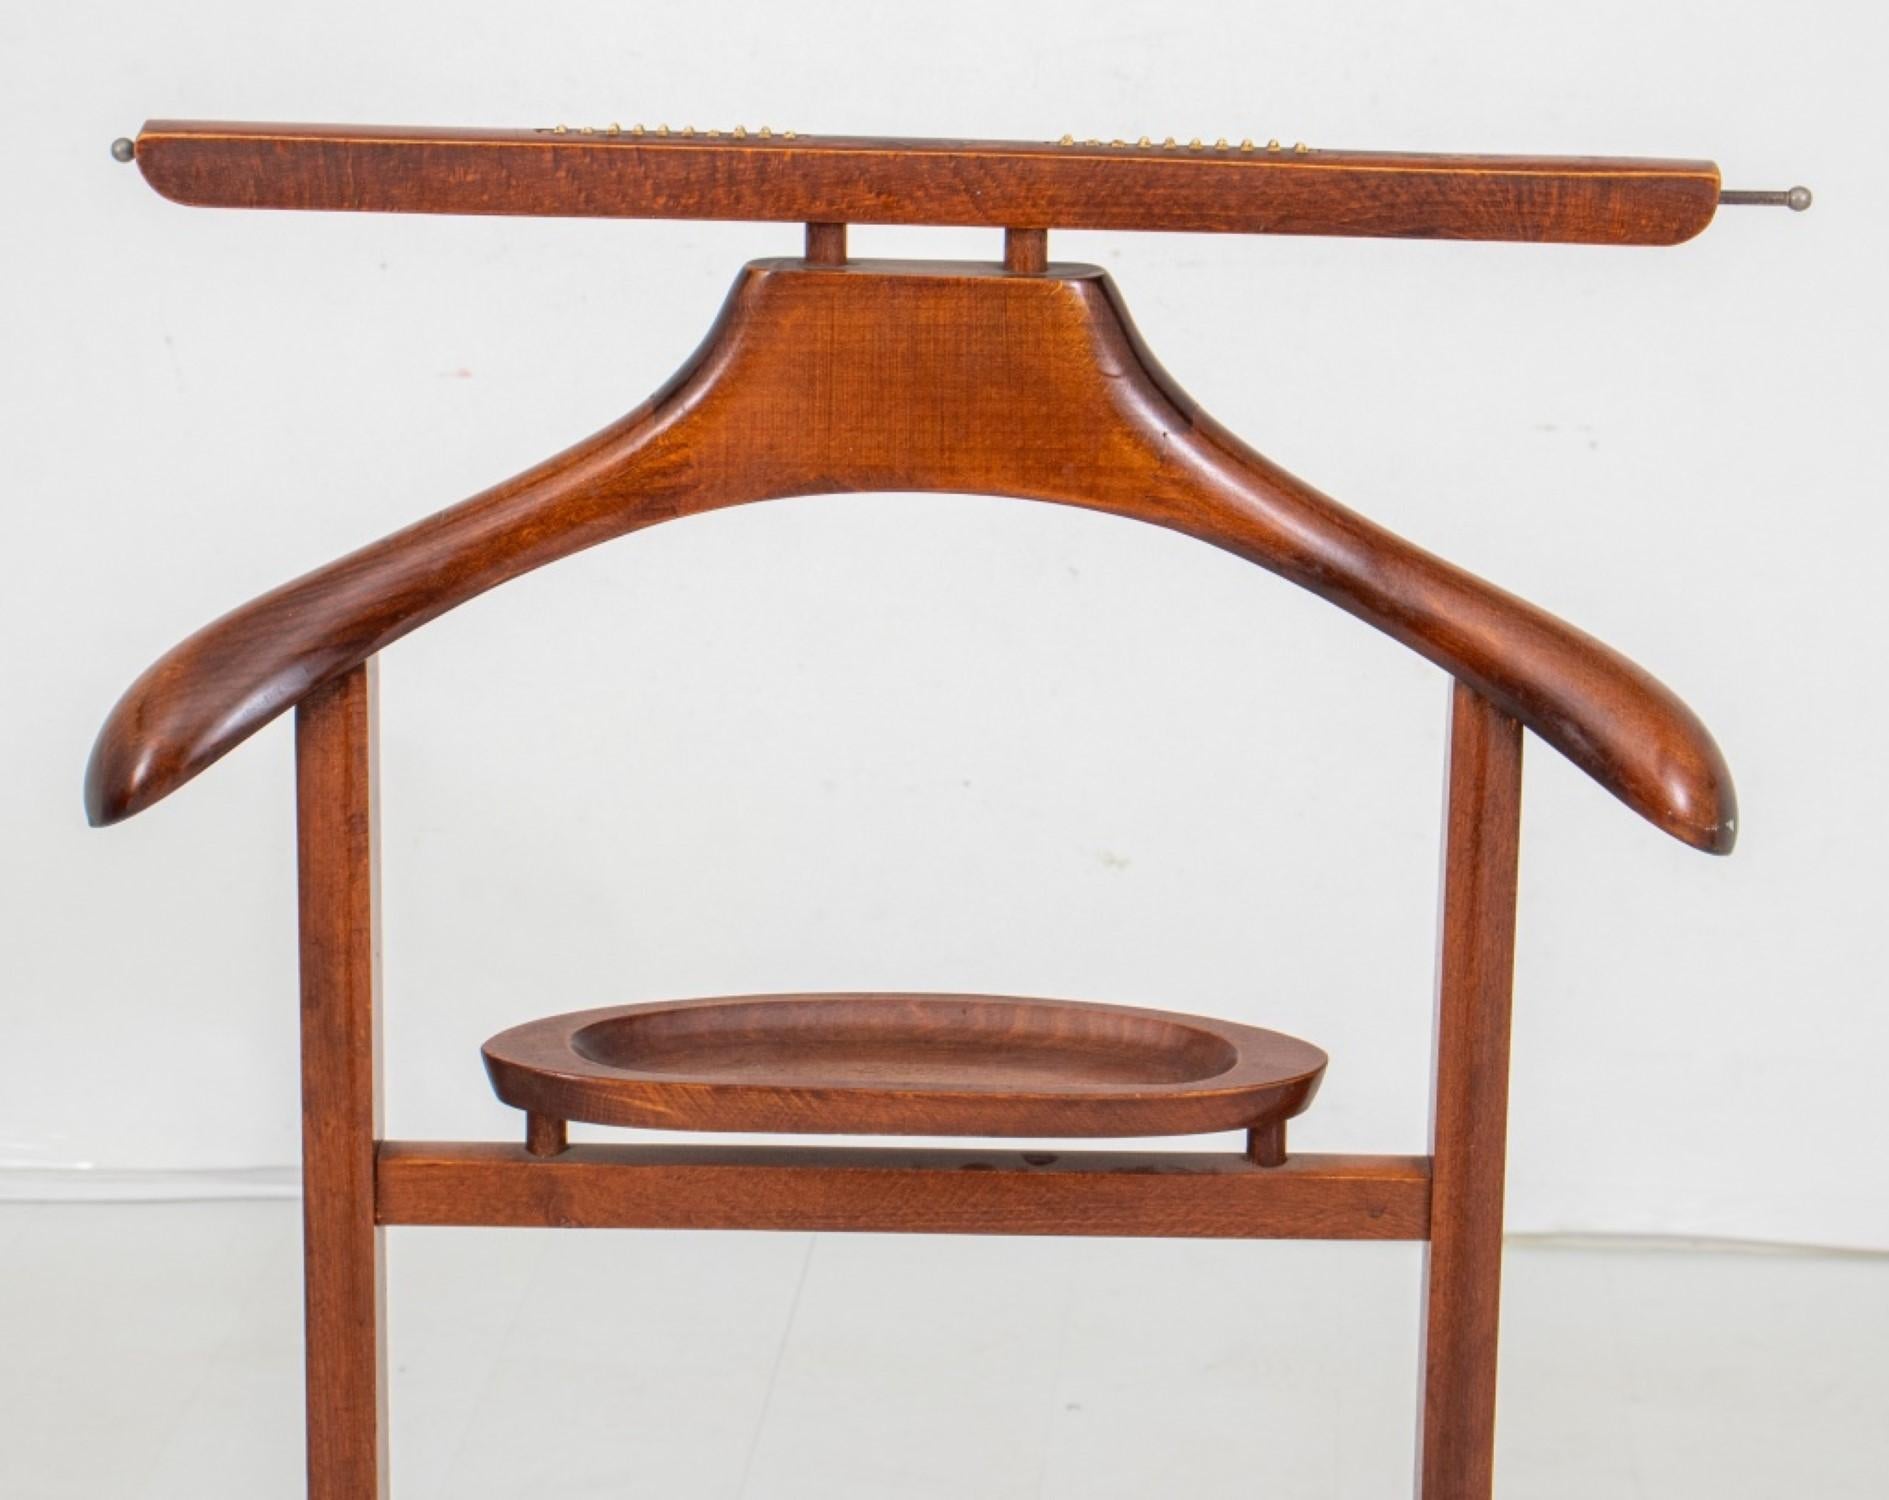 
The dimensions for the Mahogany Gentleman's Valet Stand or Silent Butler are approximately:

Height: 42